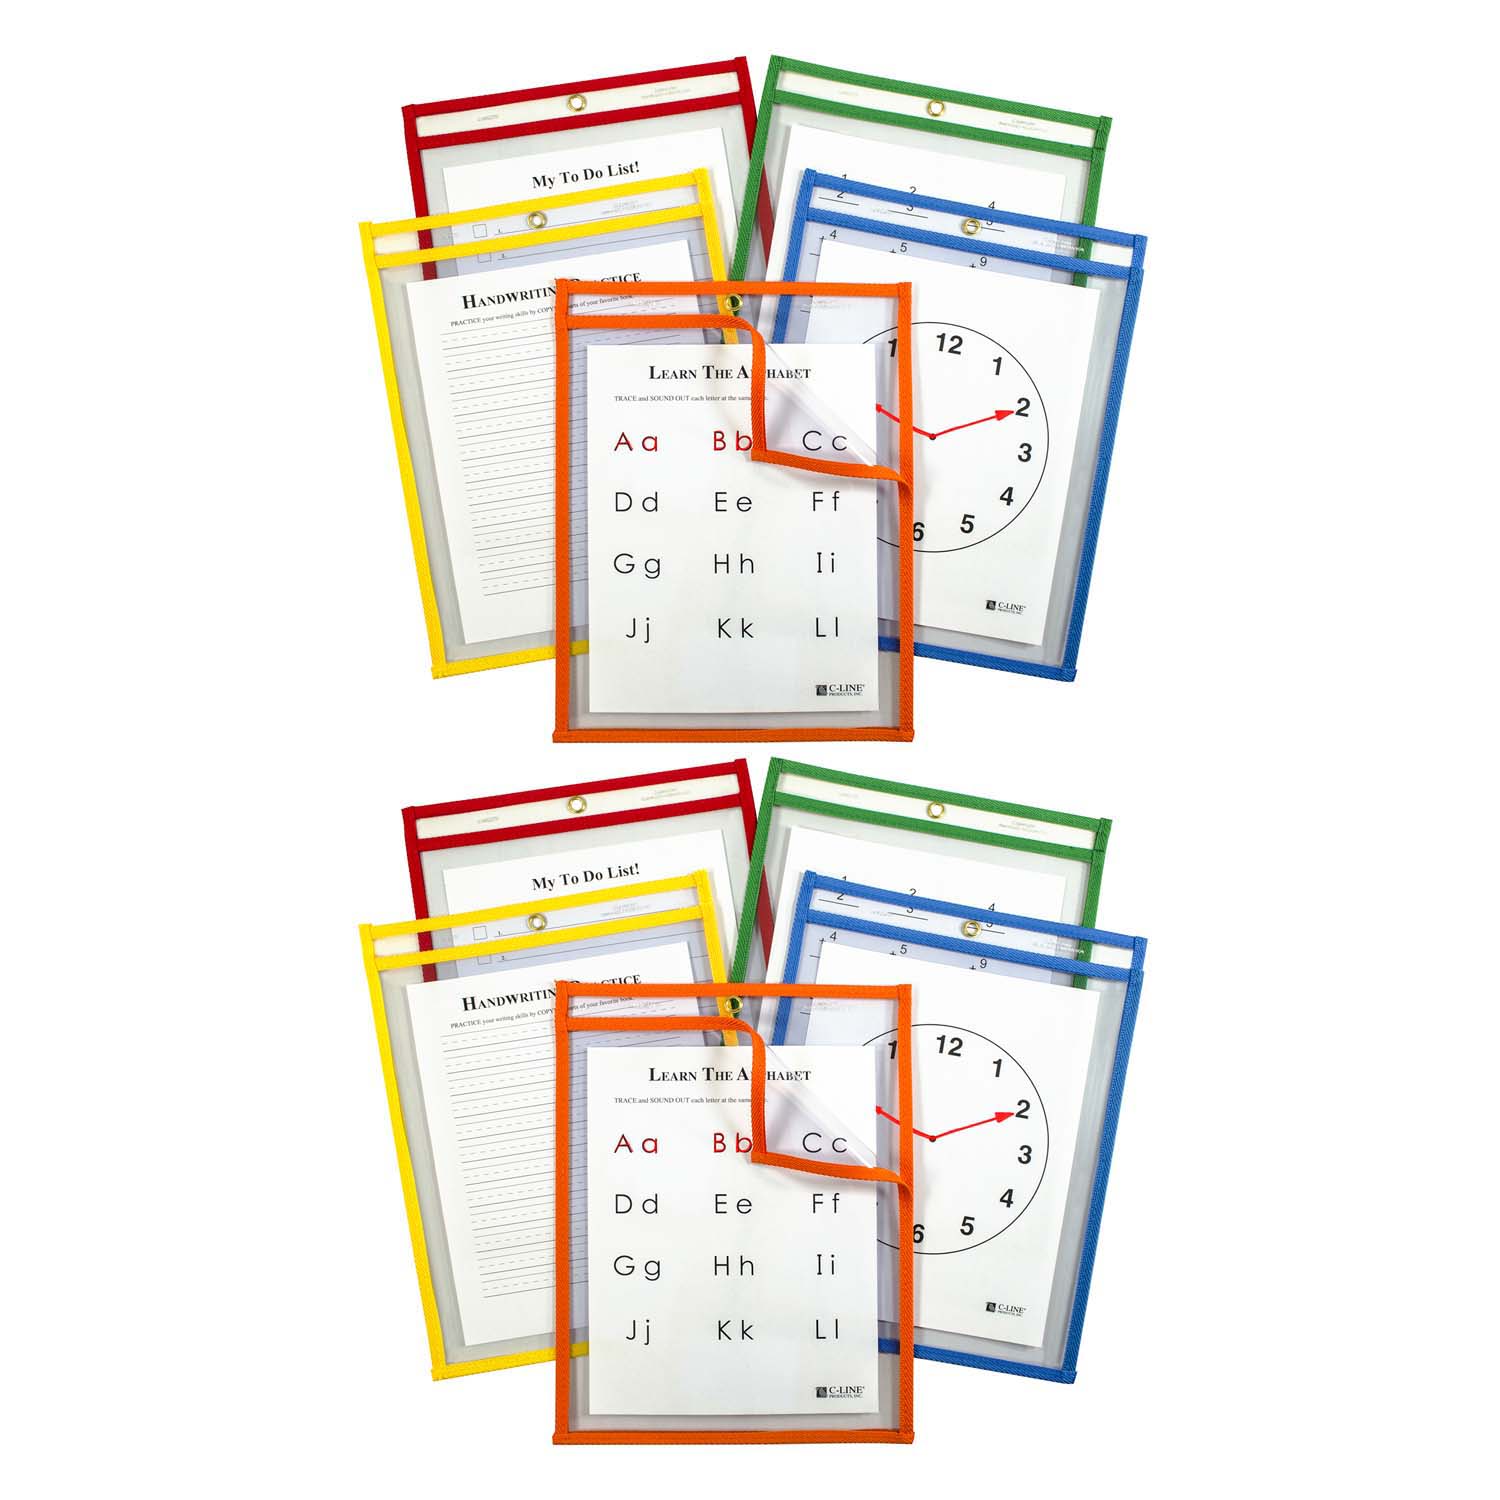 Super Heavyweight Plus Reusable Dry Erase Pockets - Study Aid, Assorted Primary Colors, 9 x 12, 5 Per Pack, 2 Packs